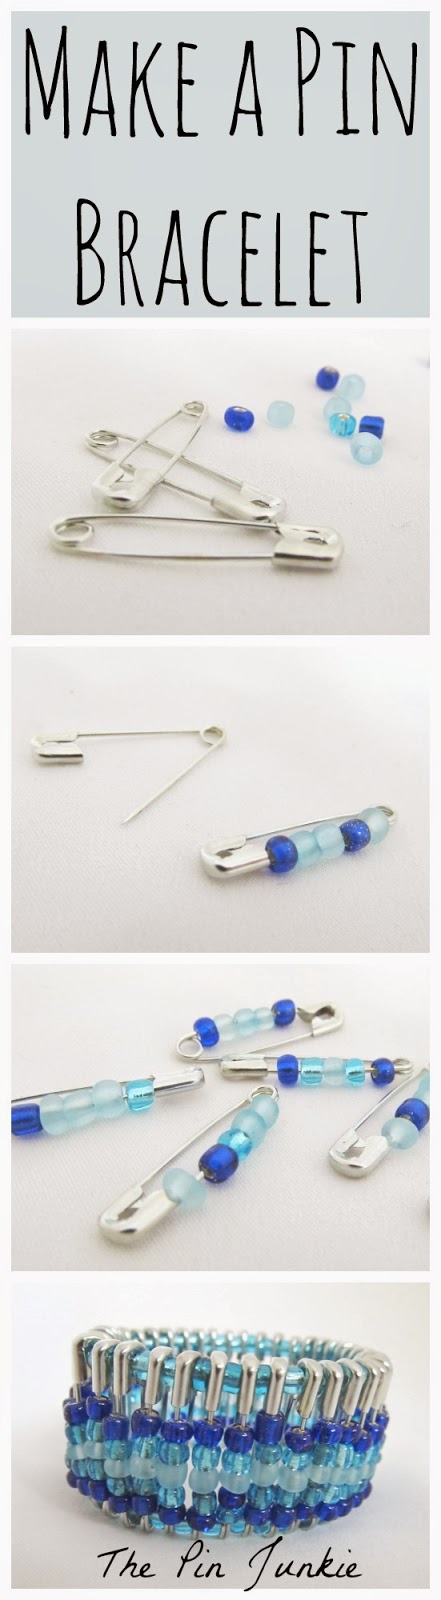 how to make a safely pin bracelet